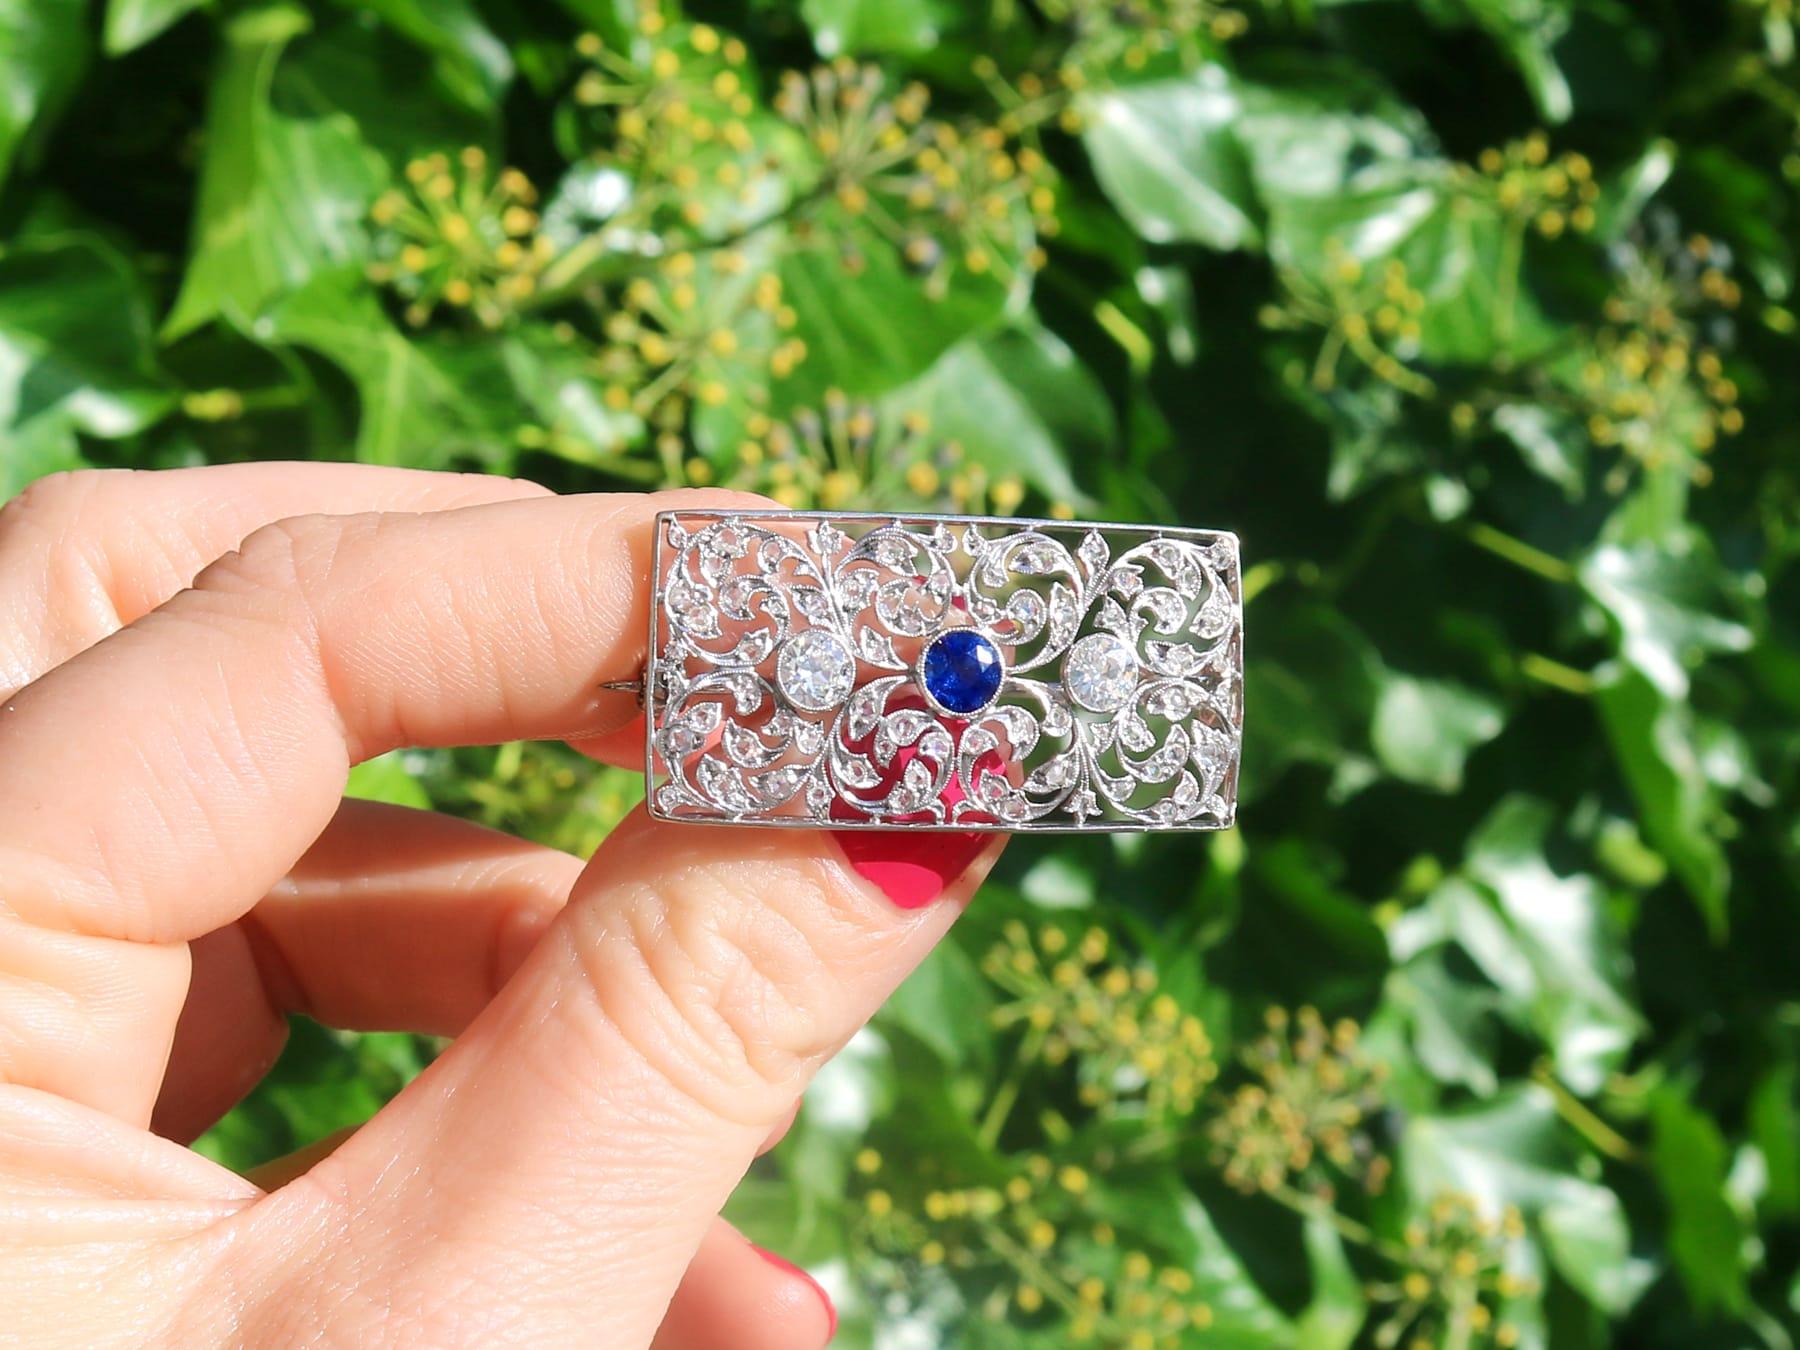 A stunning, fine and impressive antique 0.75 carat sapphire and 1.74 carat diamond, 18 karat white gold brooch; part of our diverse collection of antique brooches

This stunning, fine and impressive antique brooch has been crafted in 18k white